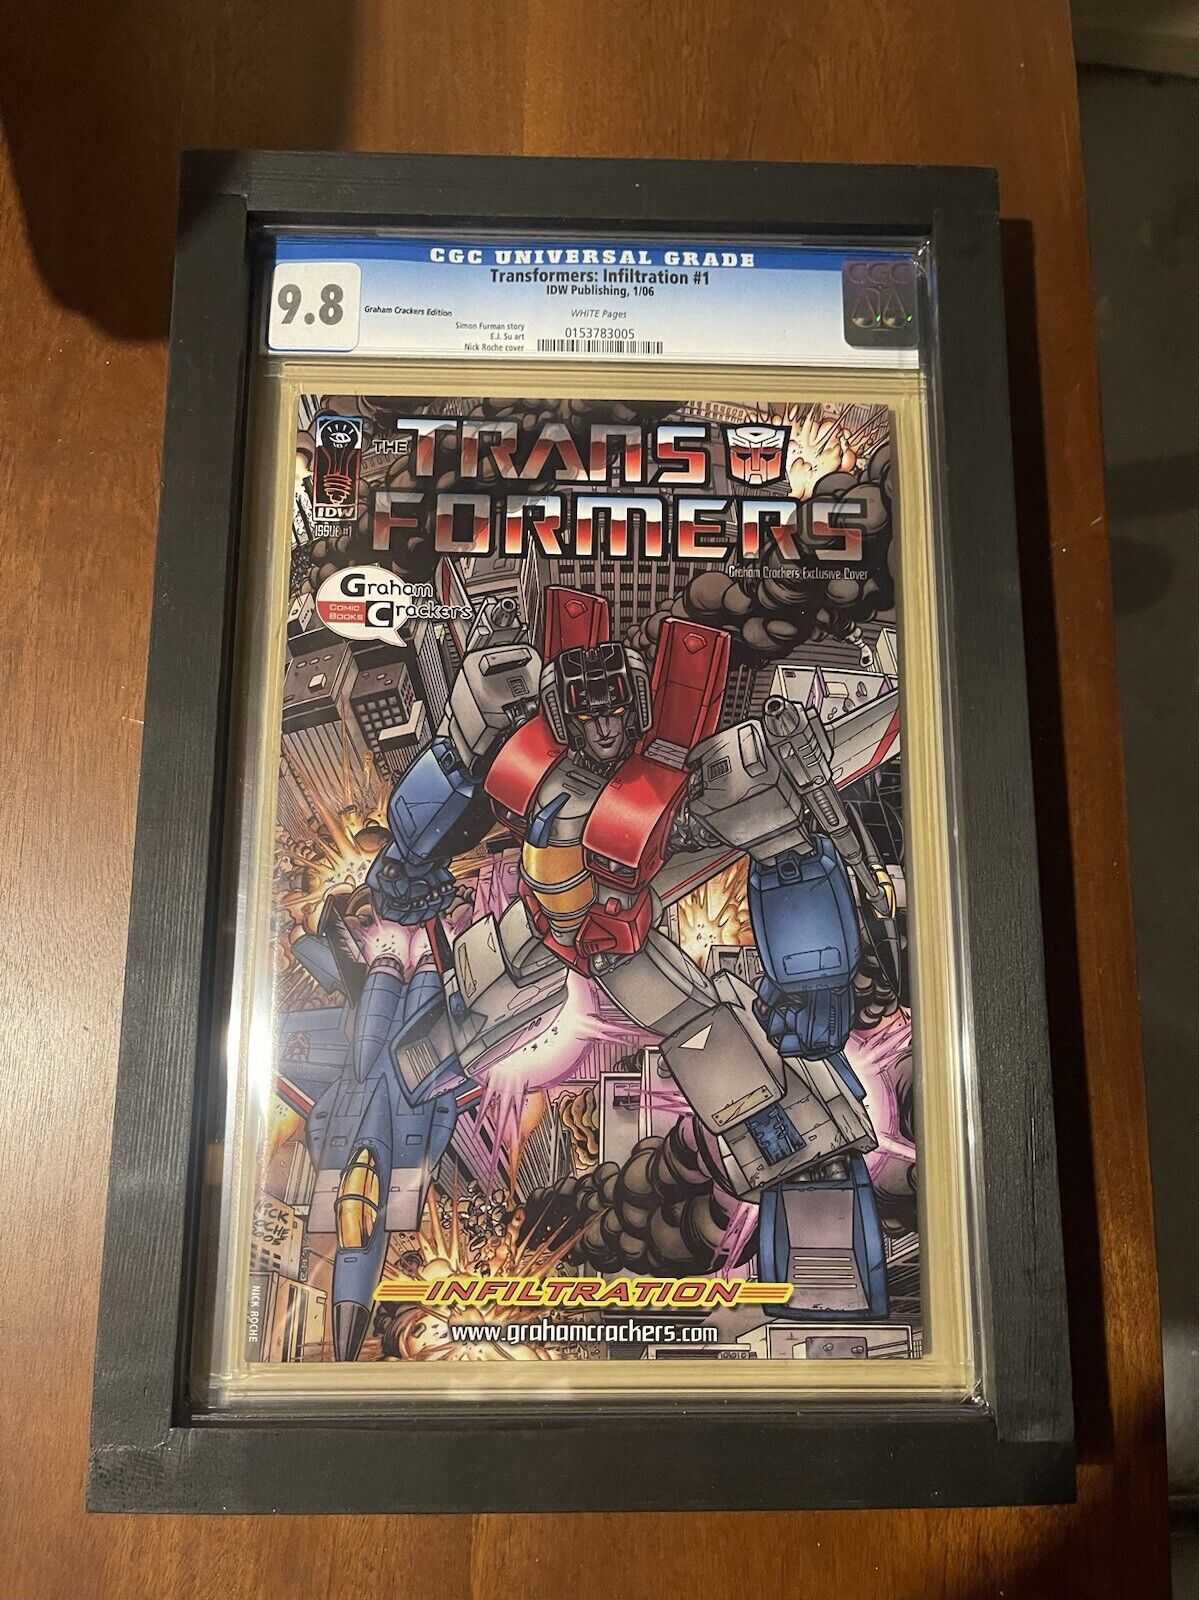 Transformers Infiltration #1 Roche Graham Crackers Variant IDW CGC 9.8 Framed